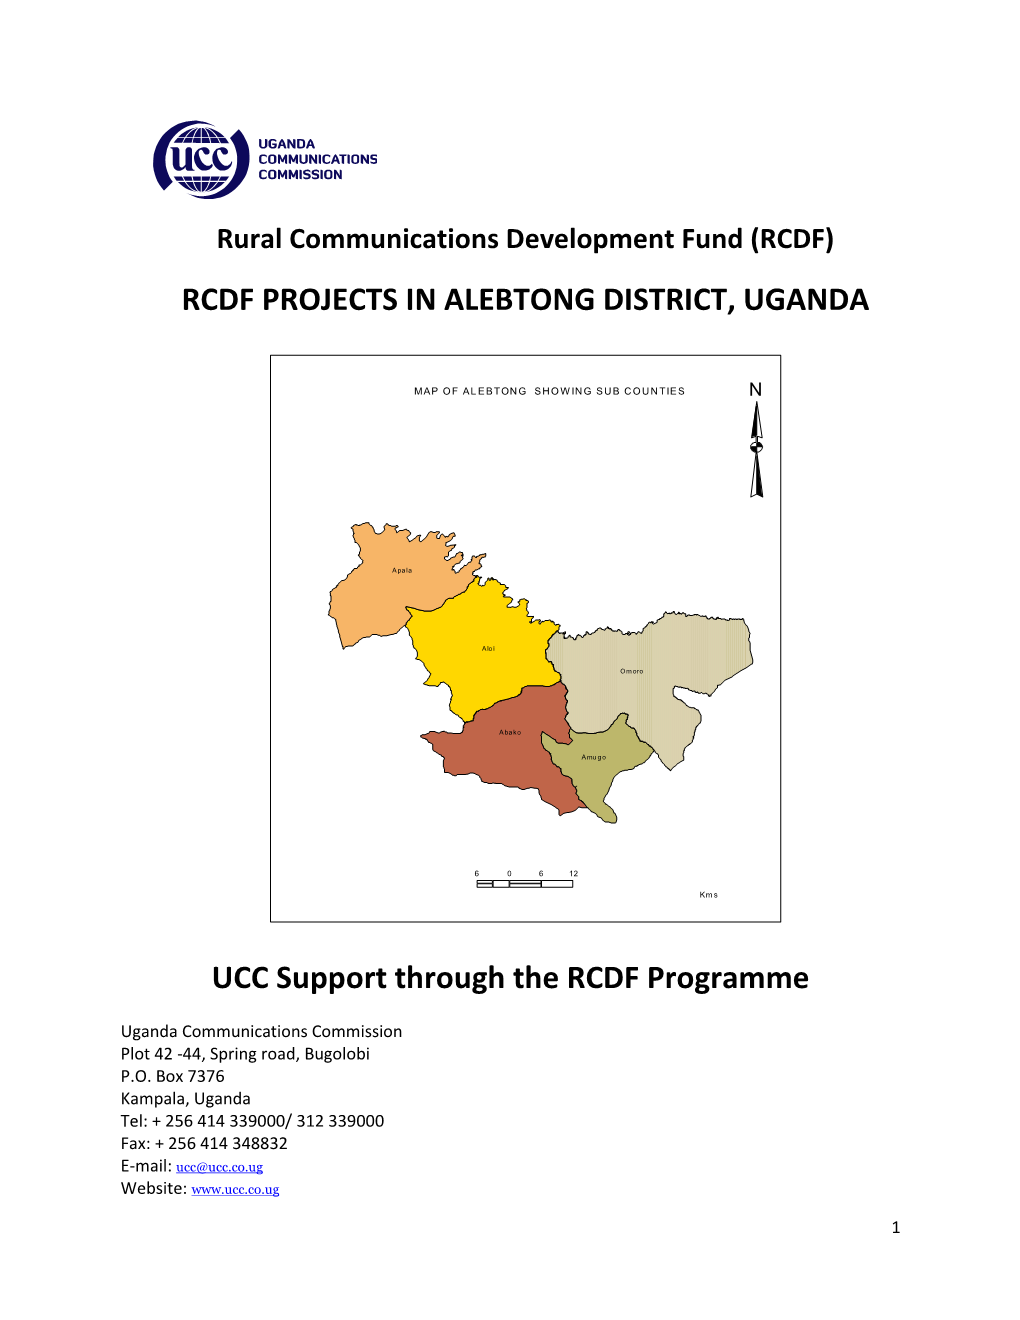 RCDF PROJECTS in ALEBTONG DISTRICT, UGANDA UCC Support